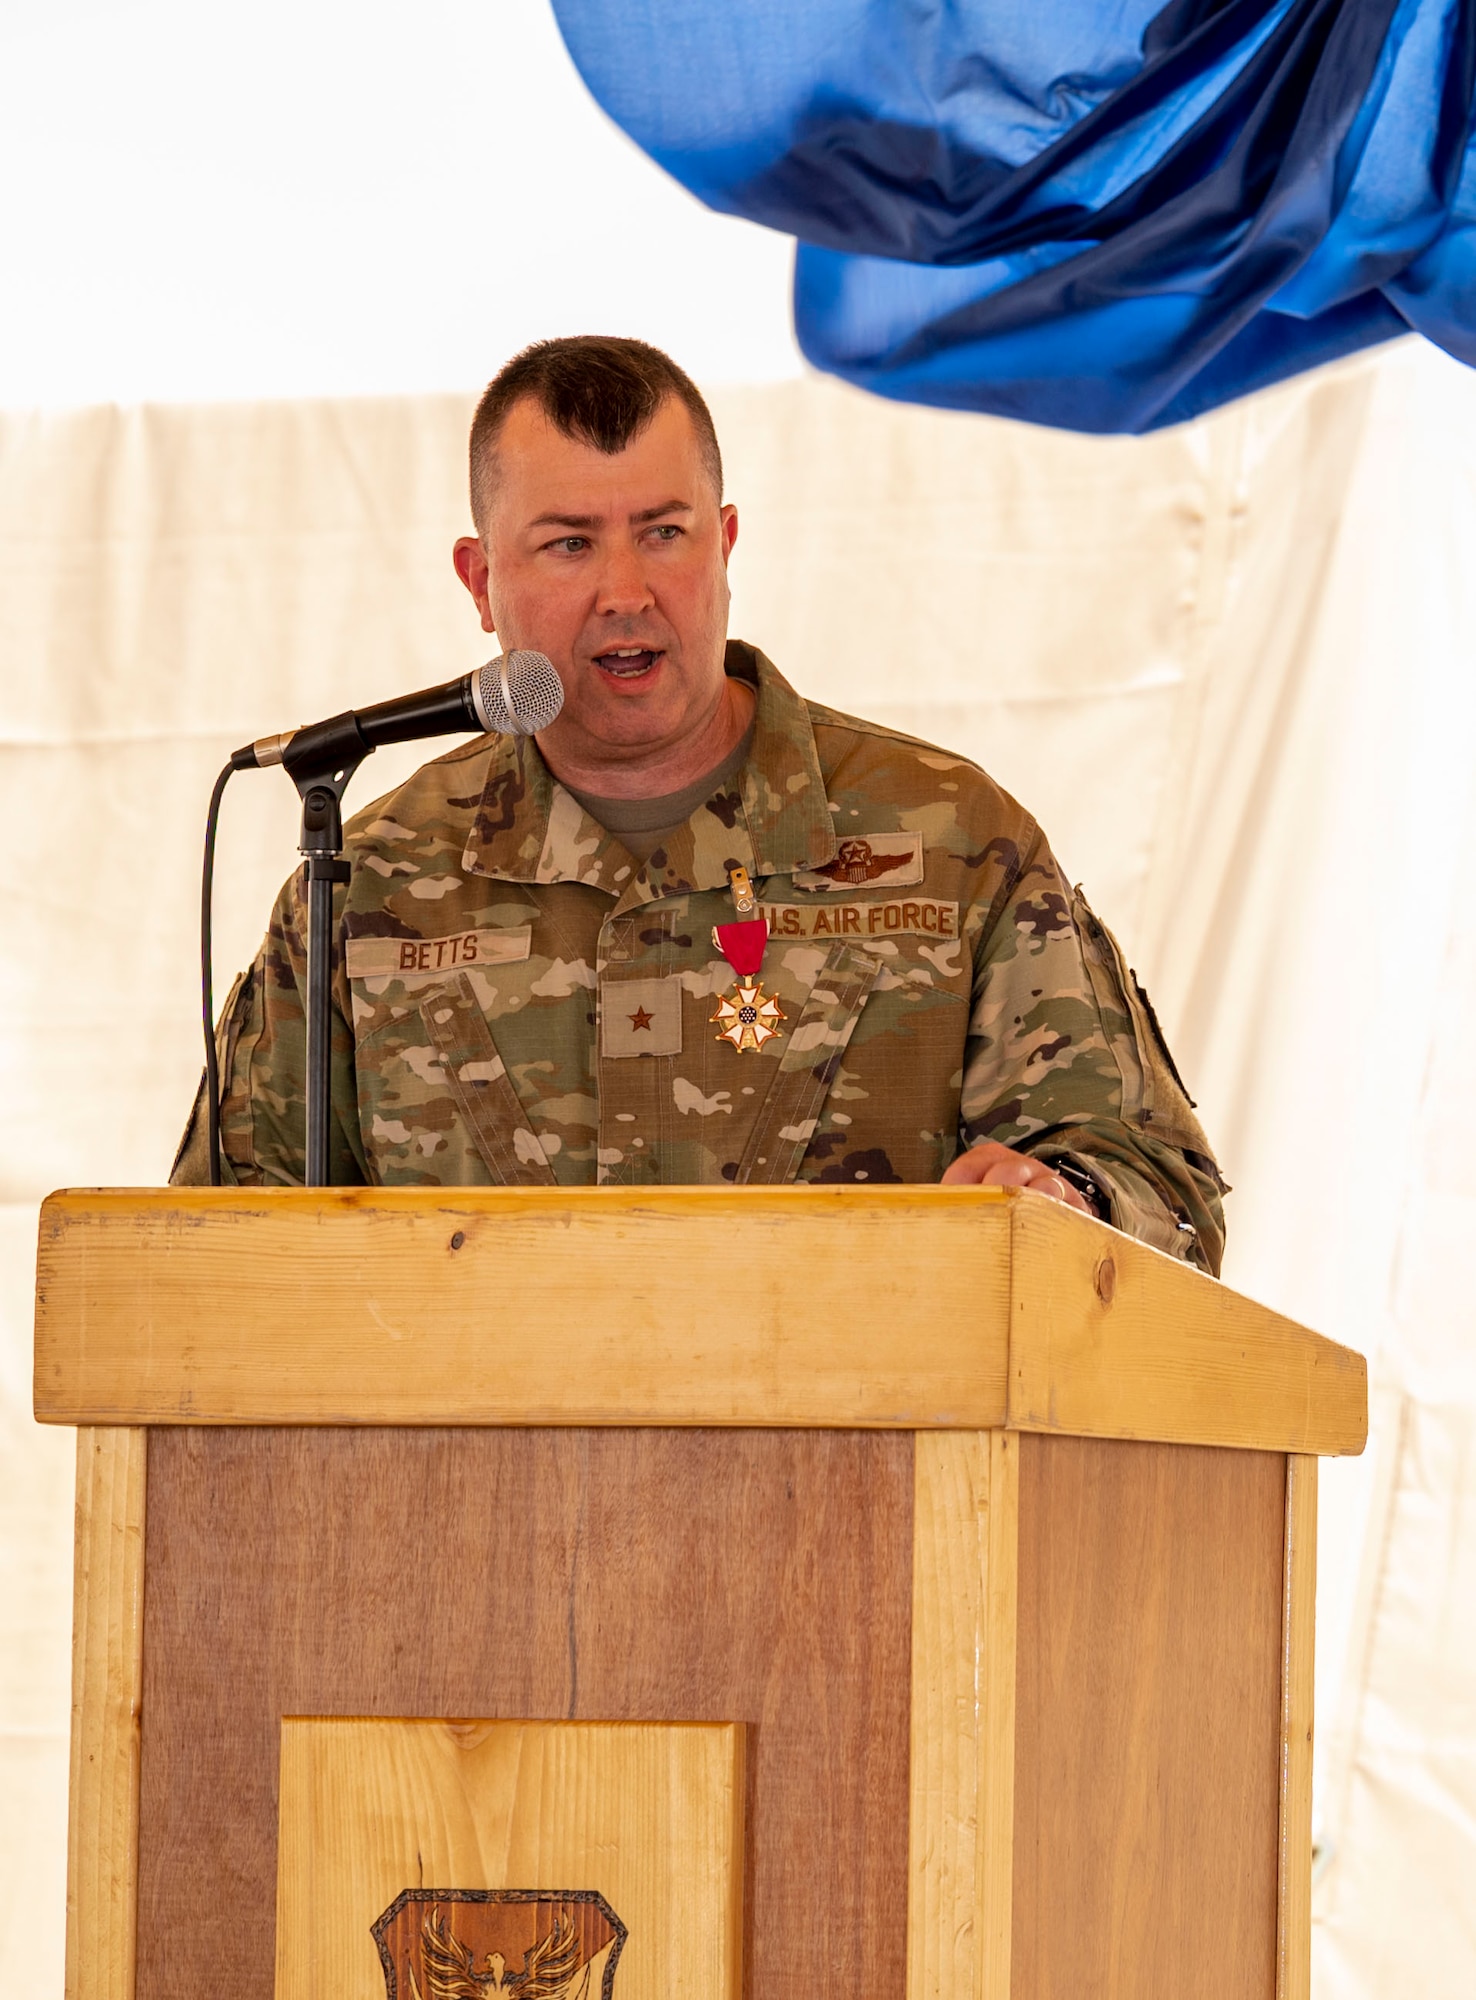 U.S. Air Force Brig. Gen. William Betts, outgoing commander of the 378th Air Expeditionary Wing, speaks during a change of command ceremony at Prince Sultan Air Base, Kingdom of Saudi Arabia, May 18, 2023. During the ceremony, Betts relinquished command of the 378th AEW to Brig. Gen. Akshai Gandhi. The tradition of change of command ceremonies are to allow service members to witness their new leader assume the responsibility and trust associated with the position of commander. (U.S. Air Force photo by Senior Airman Stephani Barge)